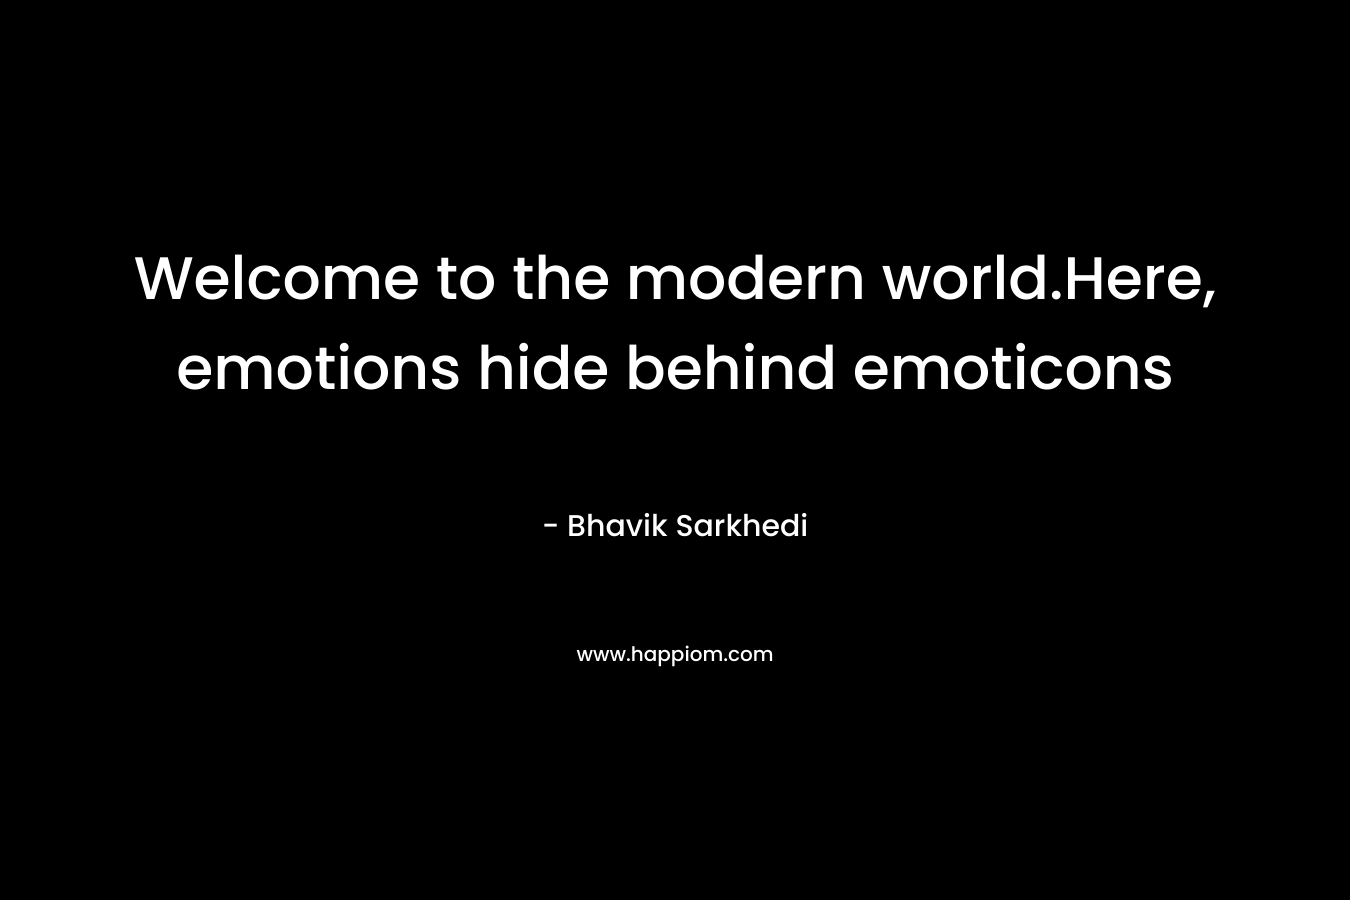 Welcome to the modern world.Here, emotions hide behind emoticons